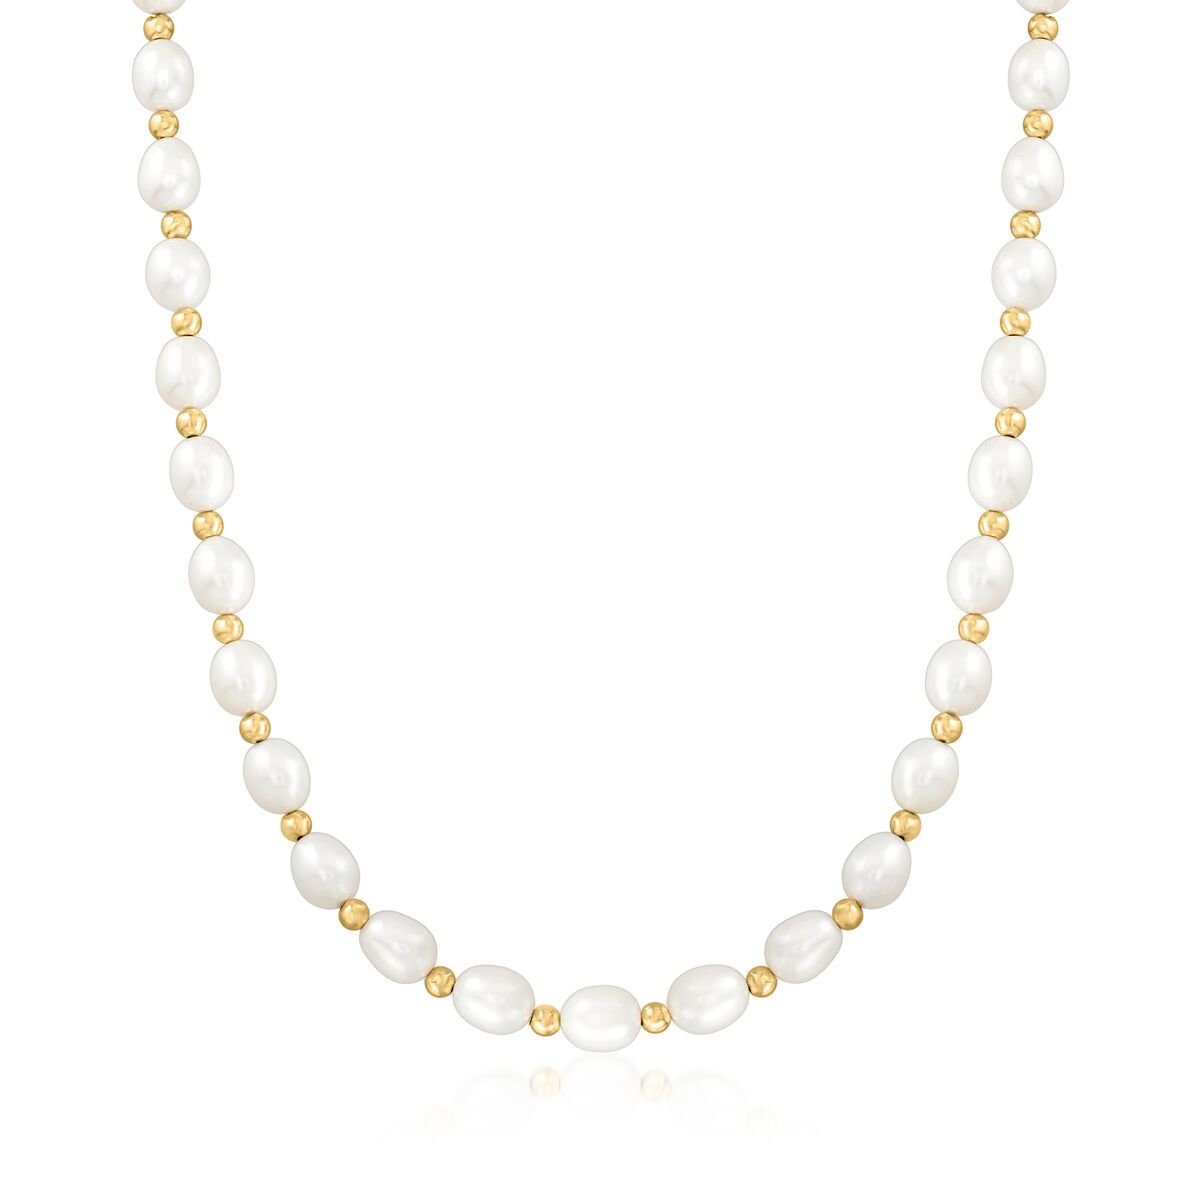 8-9mm Cultured Oval Pearl Necklace with 14kt Yellow Gold. 16" | Ross-Simons